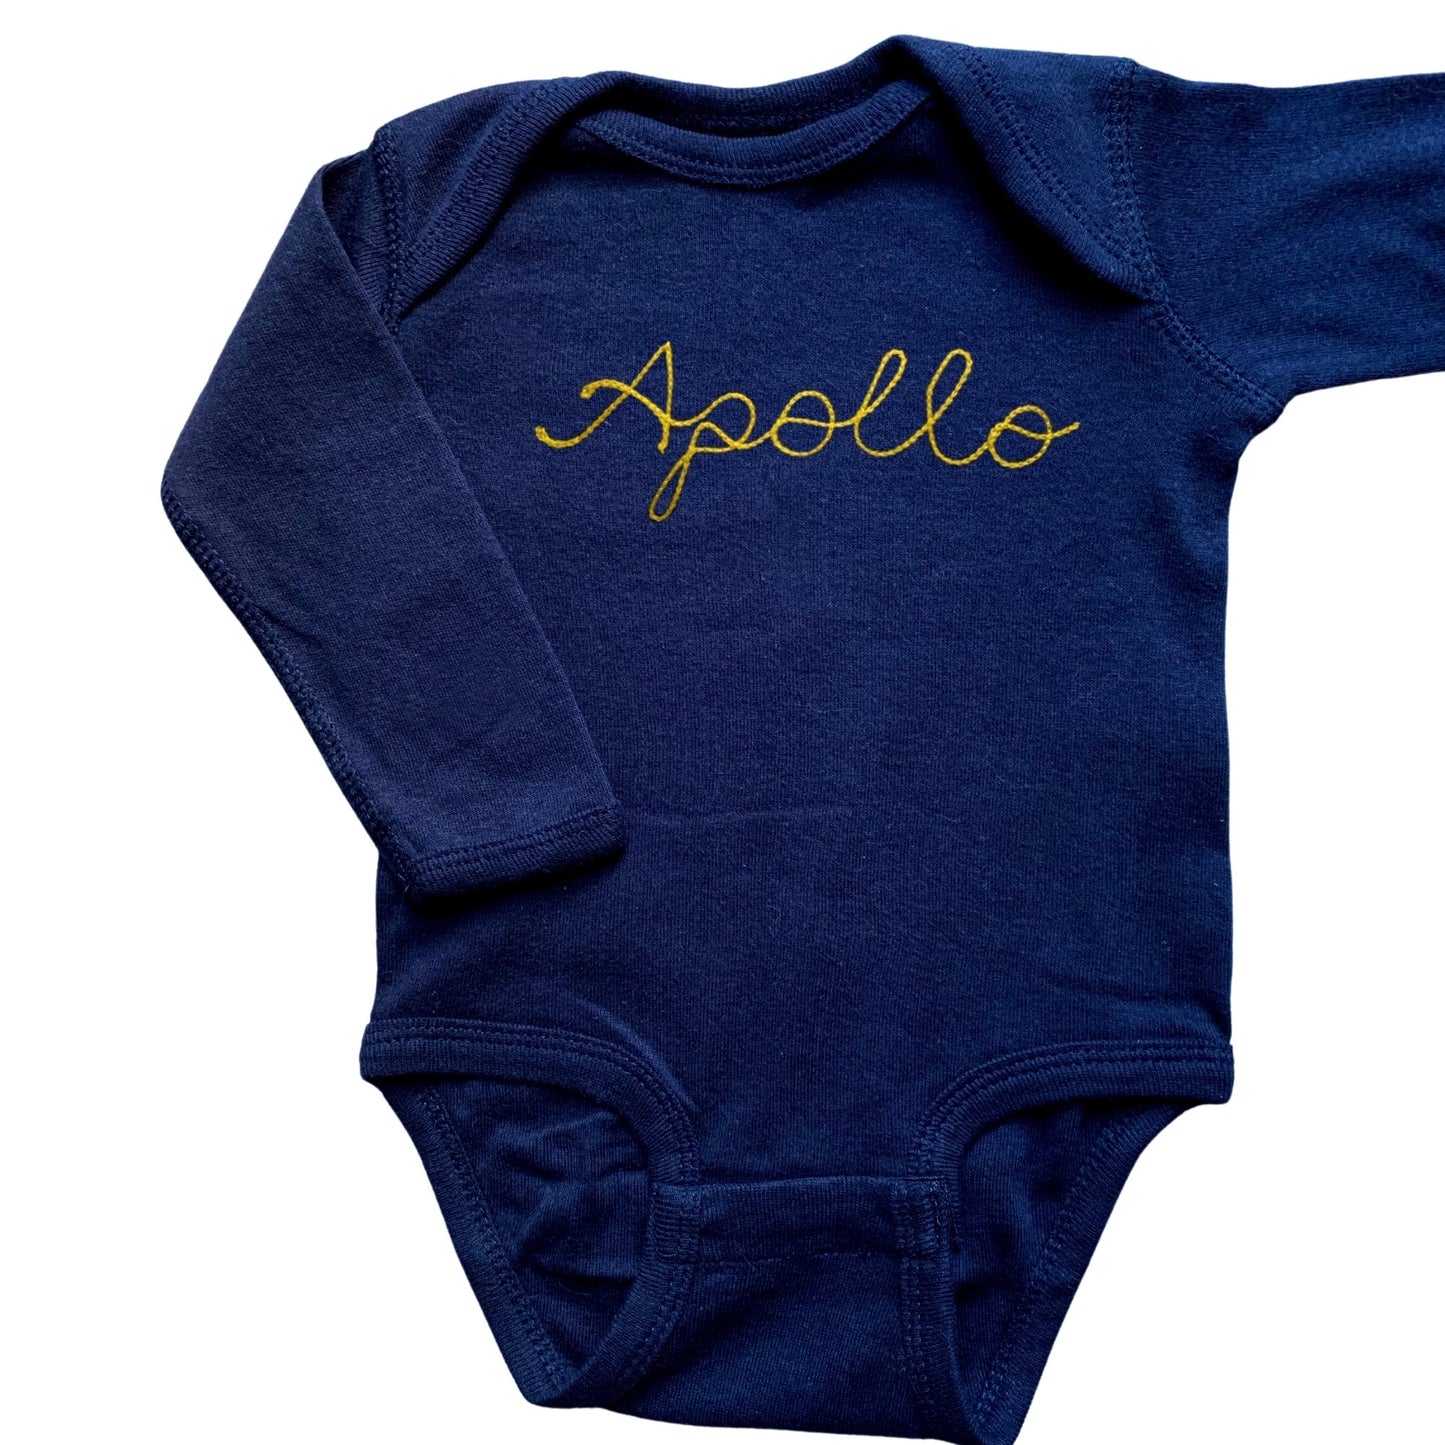 The Long Sleeve Chainstitch Baby Onesie - Navy